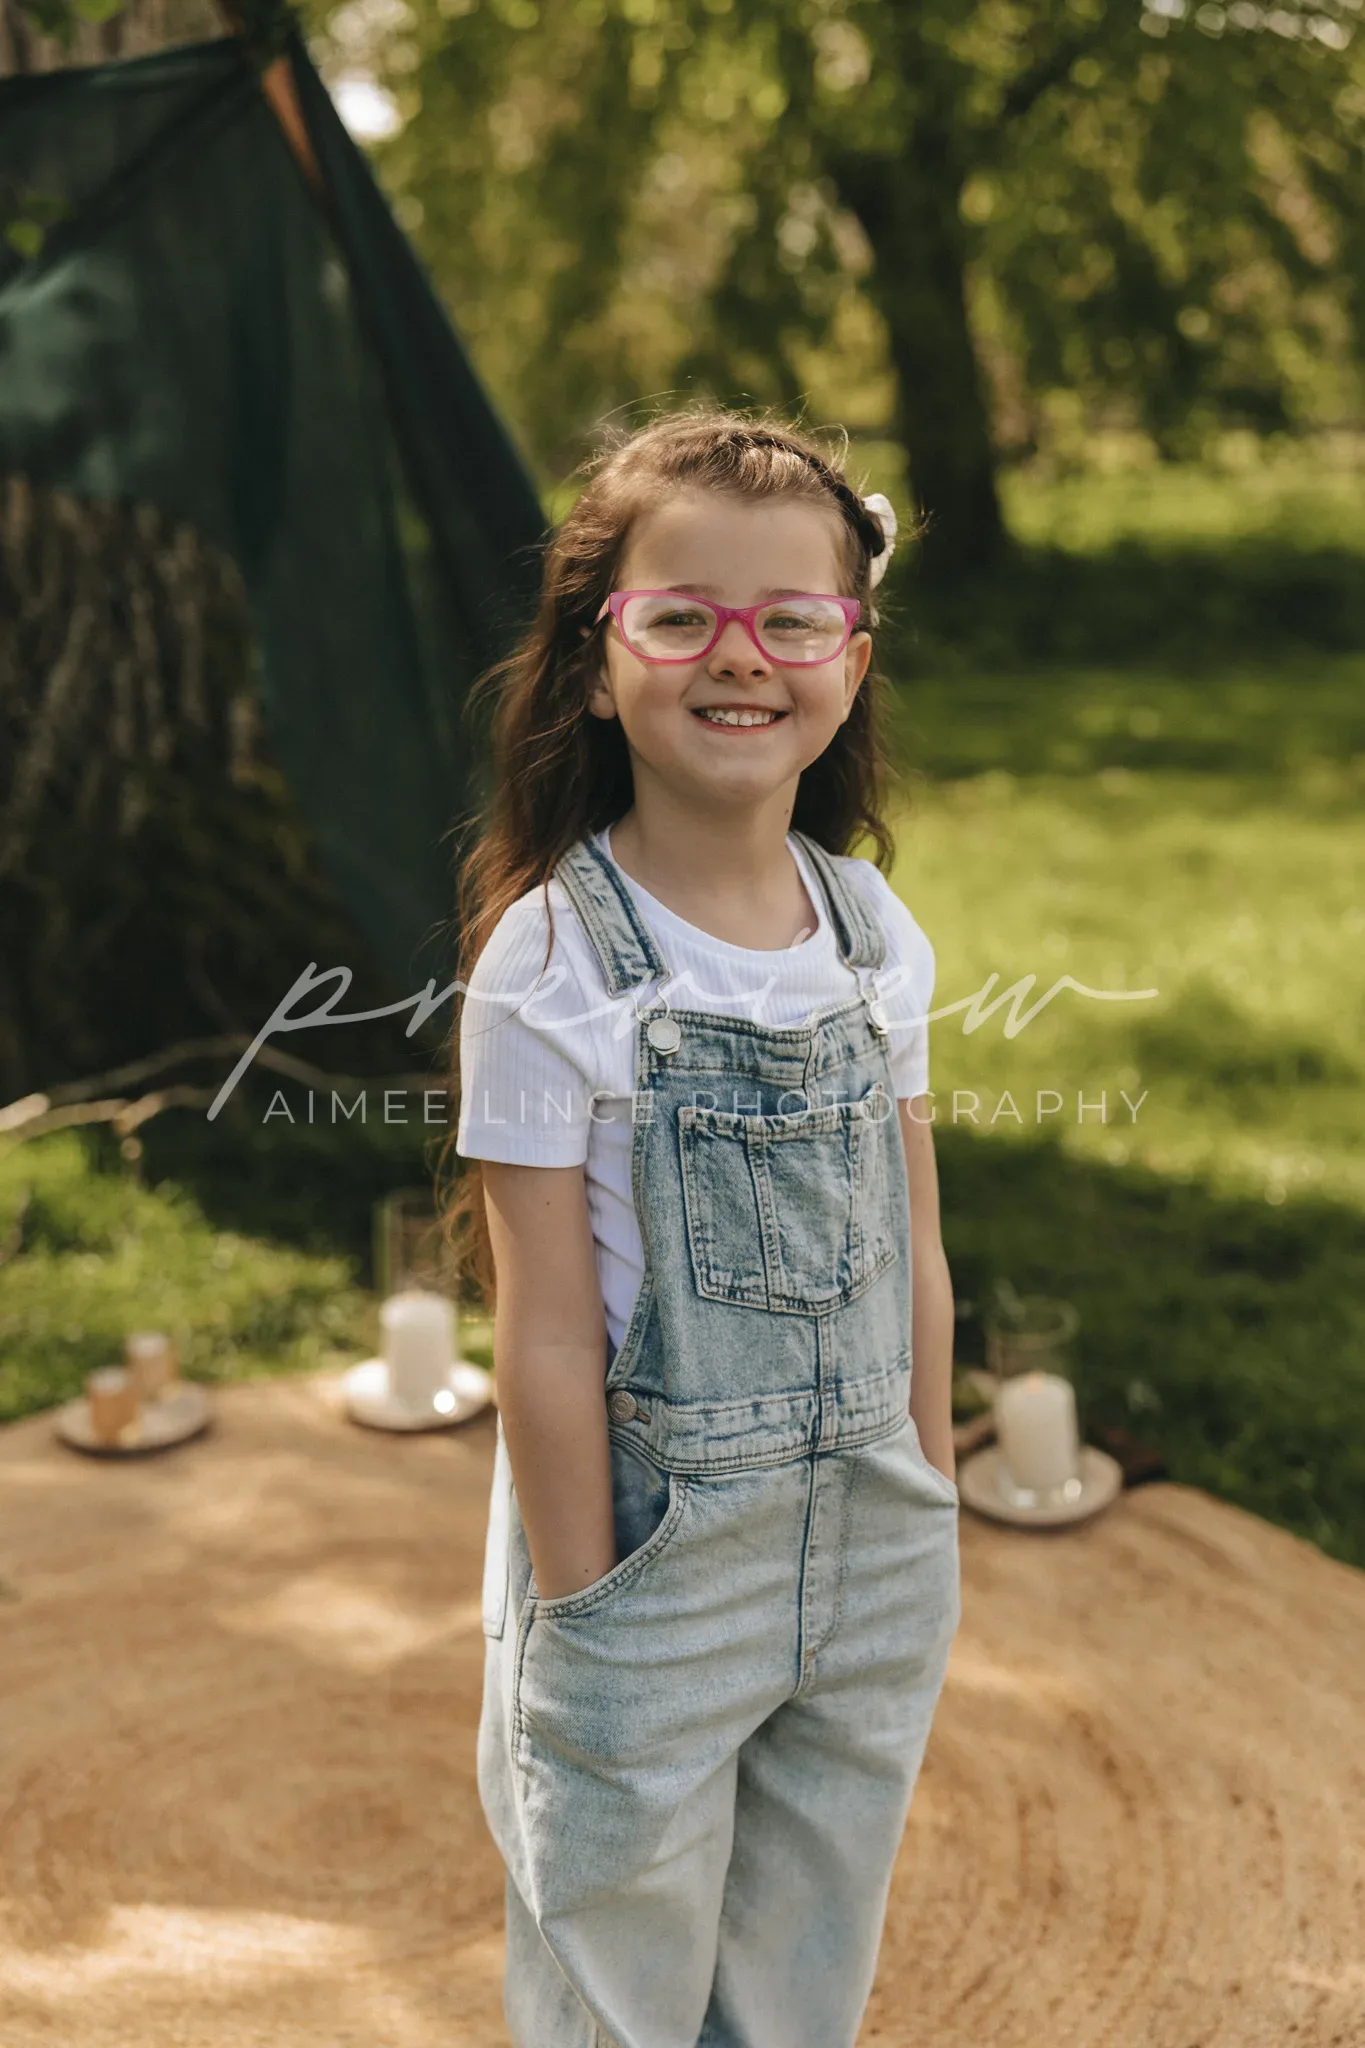 A joyful young girl with long brown hair and pink glasses wears denim overalls. she stands in a sunny park with a tent and picnic setup in the background, smiling broadly at the camera.